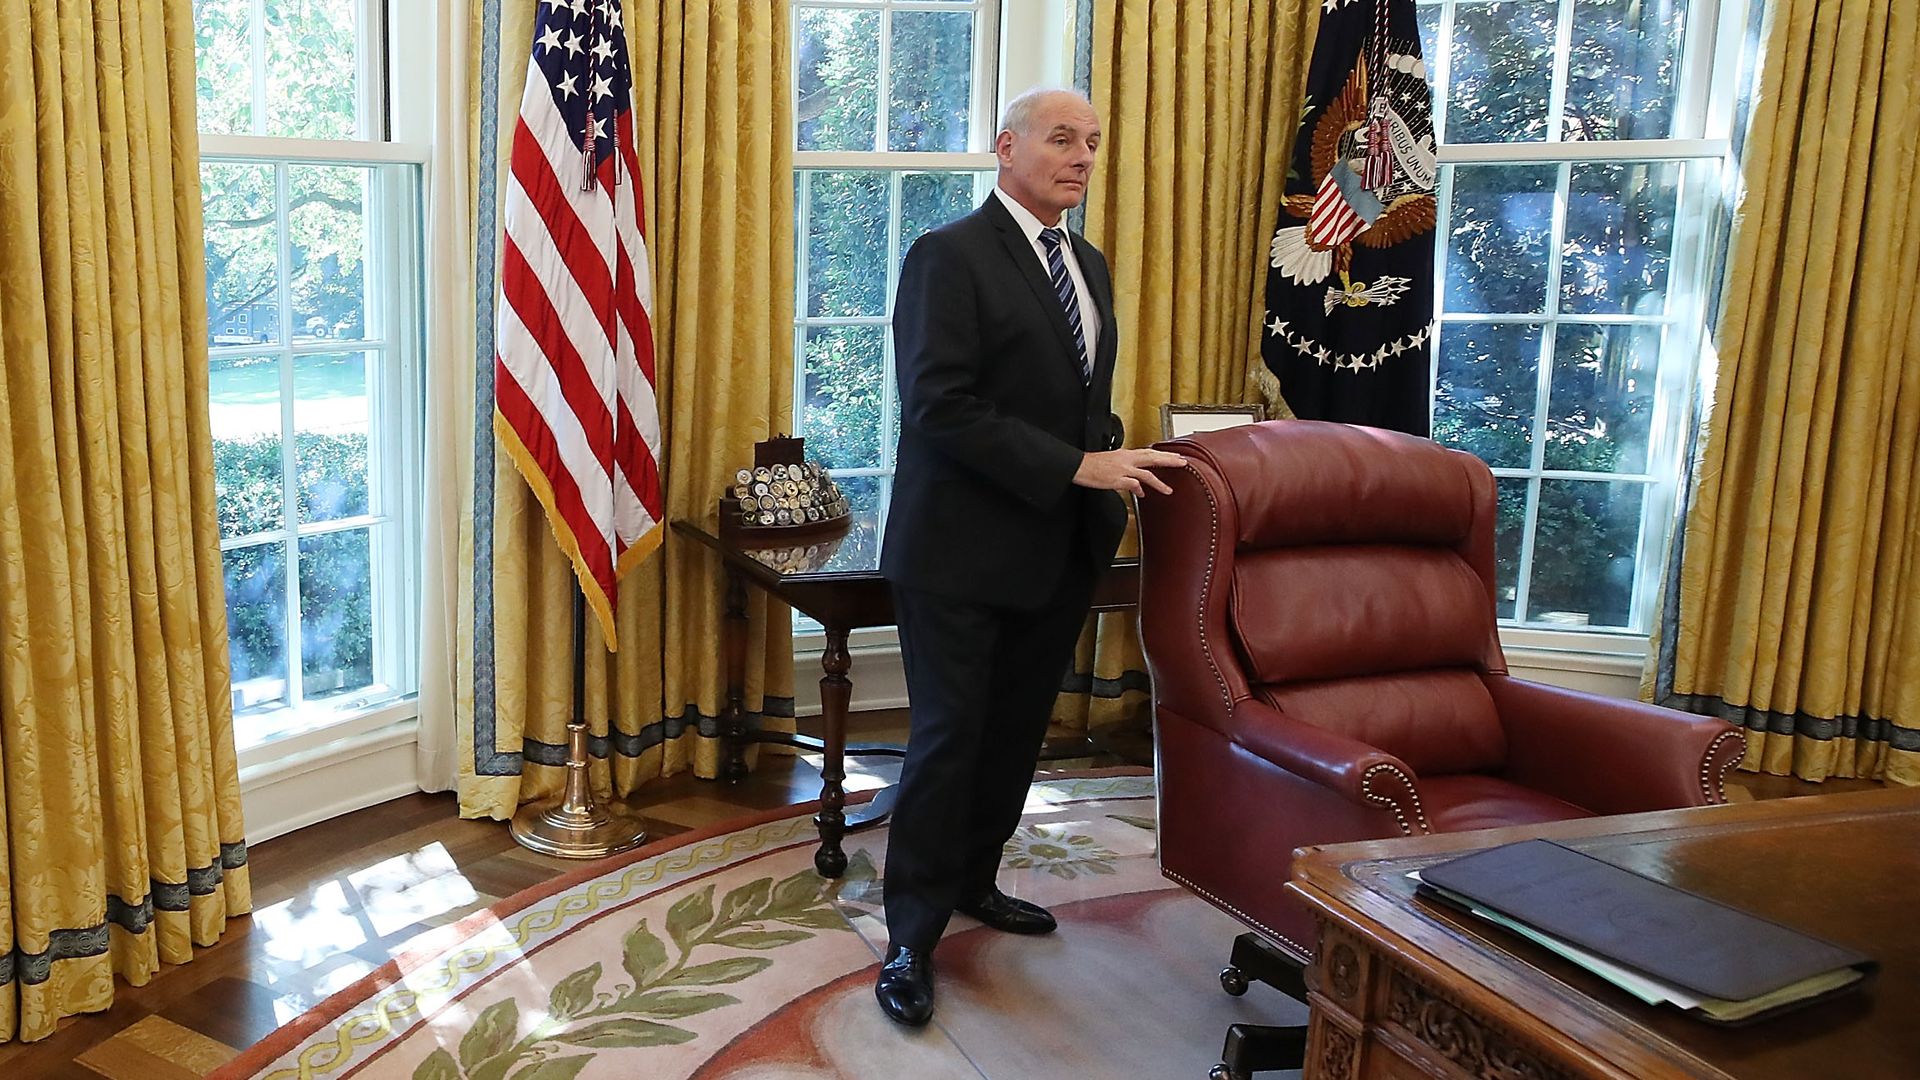 John Kelly stands behind the desk in the Oval Office